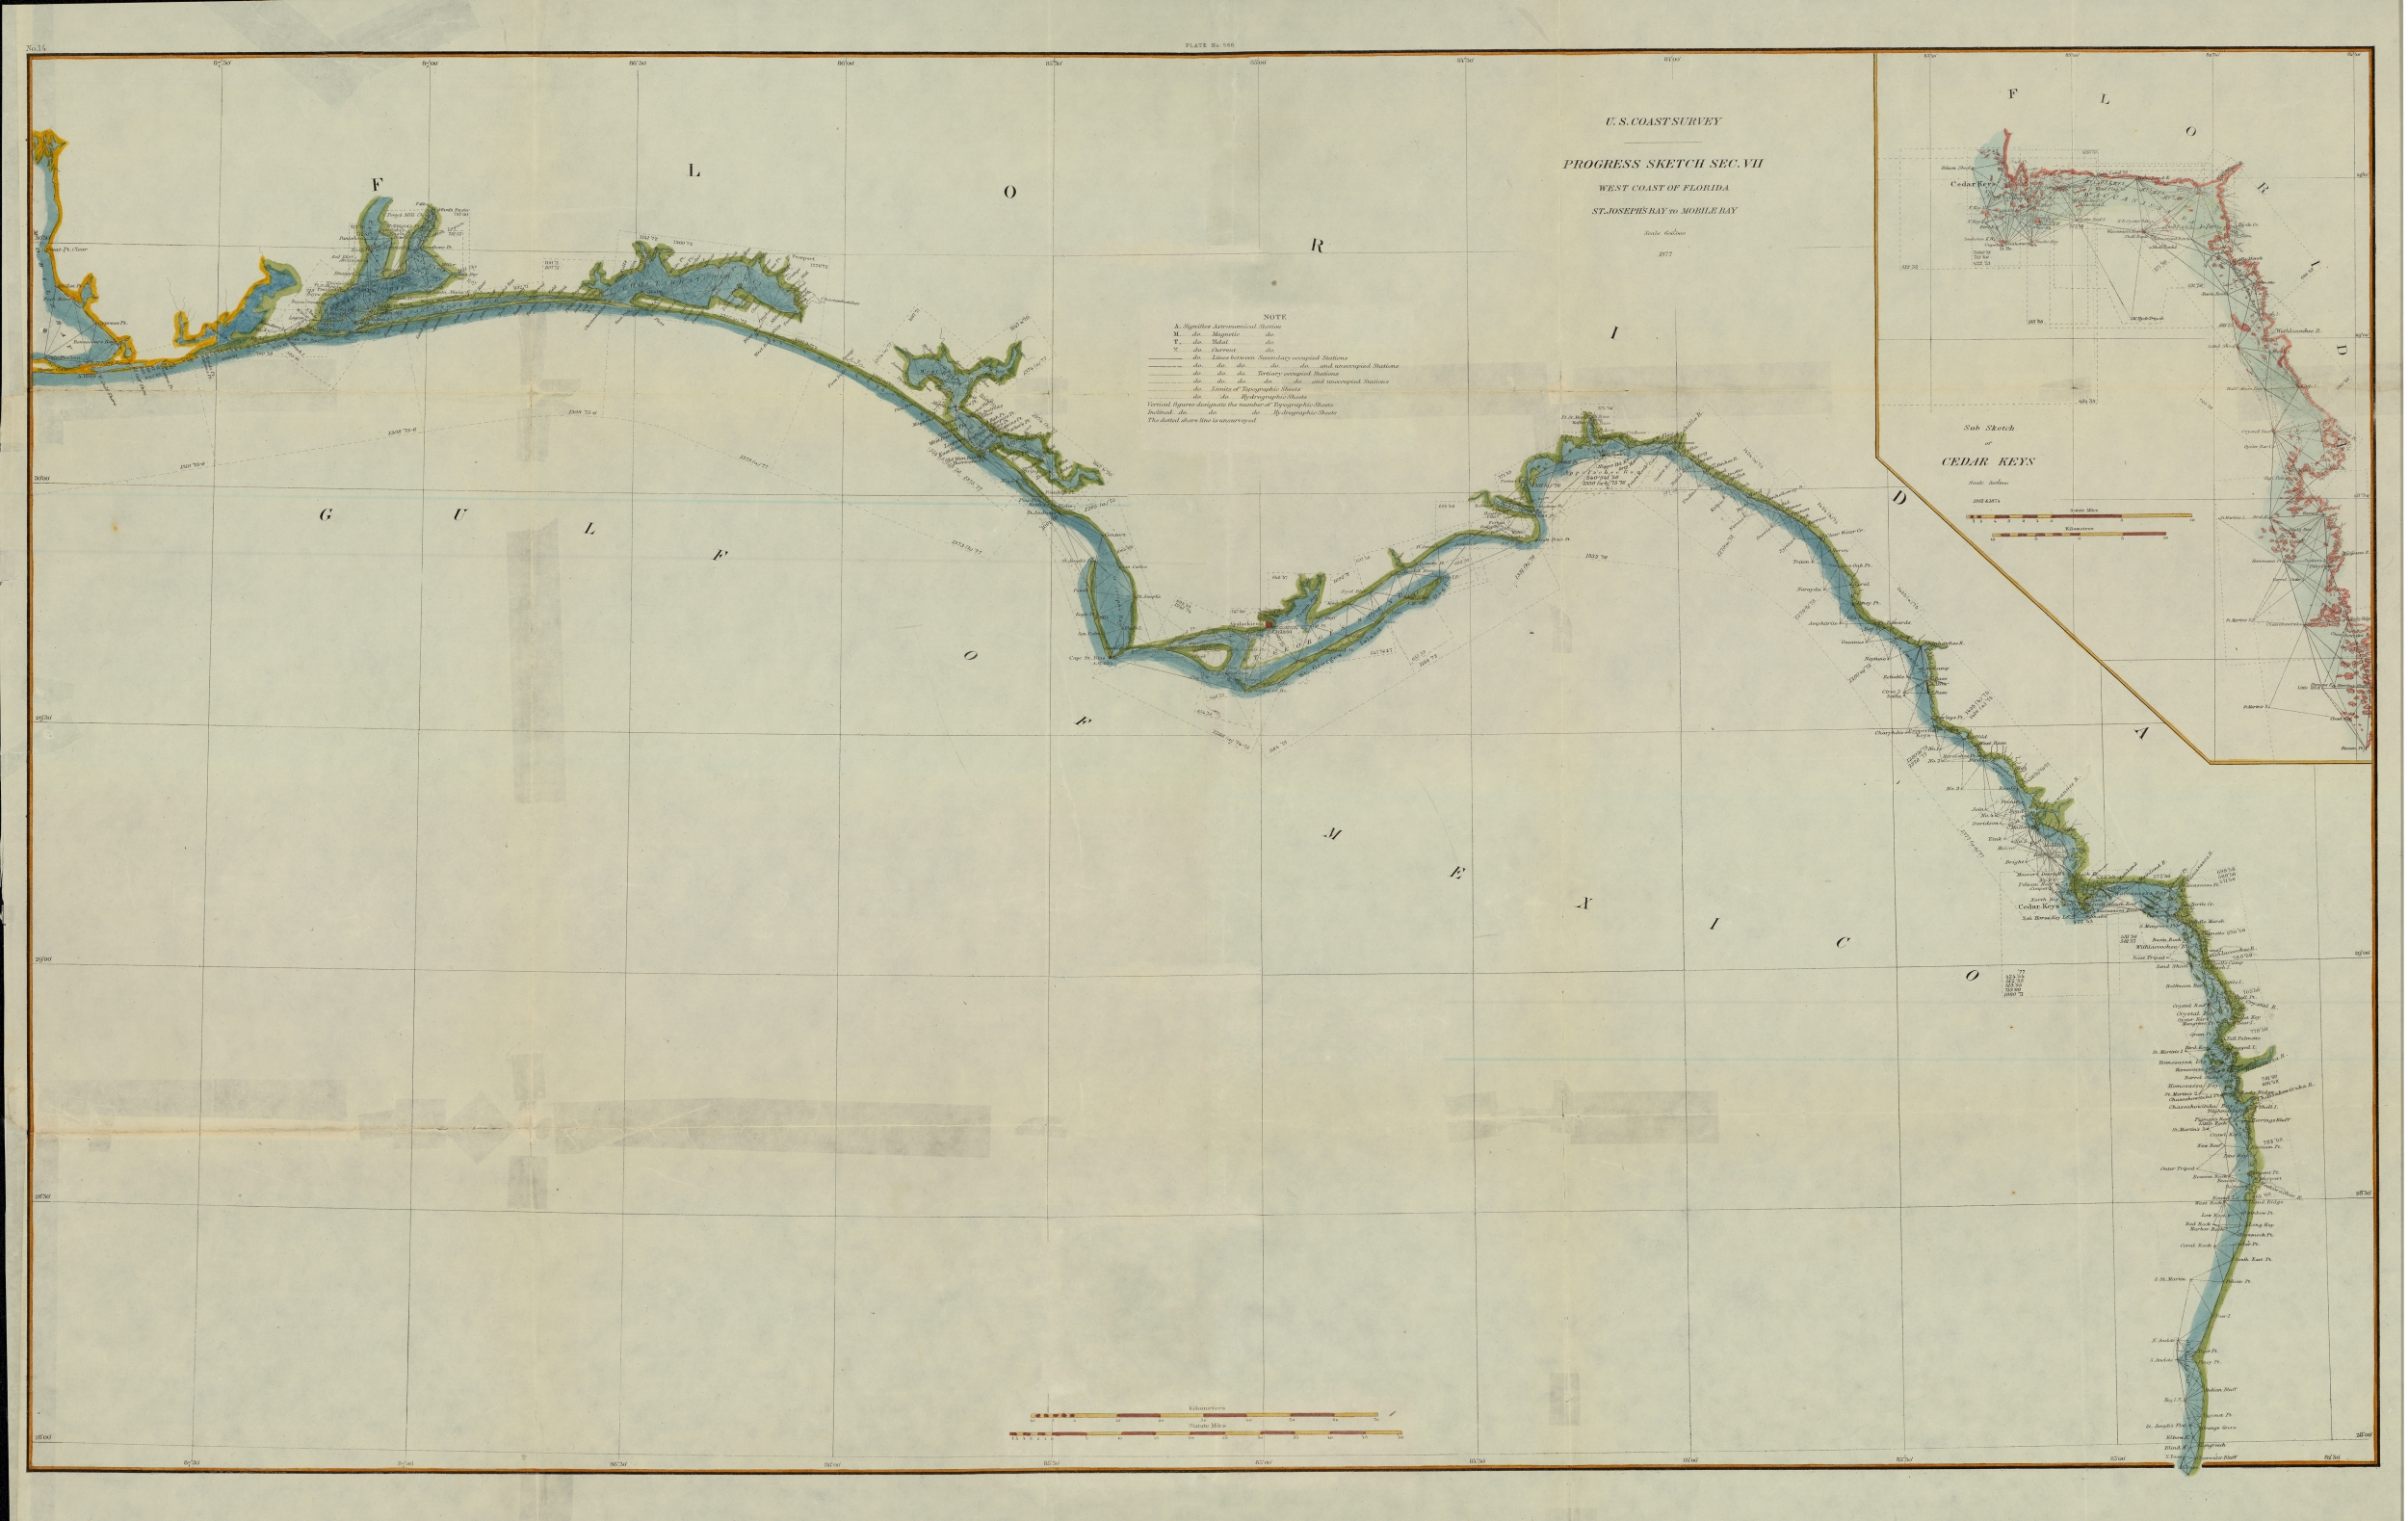 Map of West Coast of Florida, St. Joseph Bay to Mobile Bay, 1877